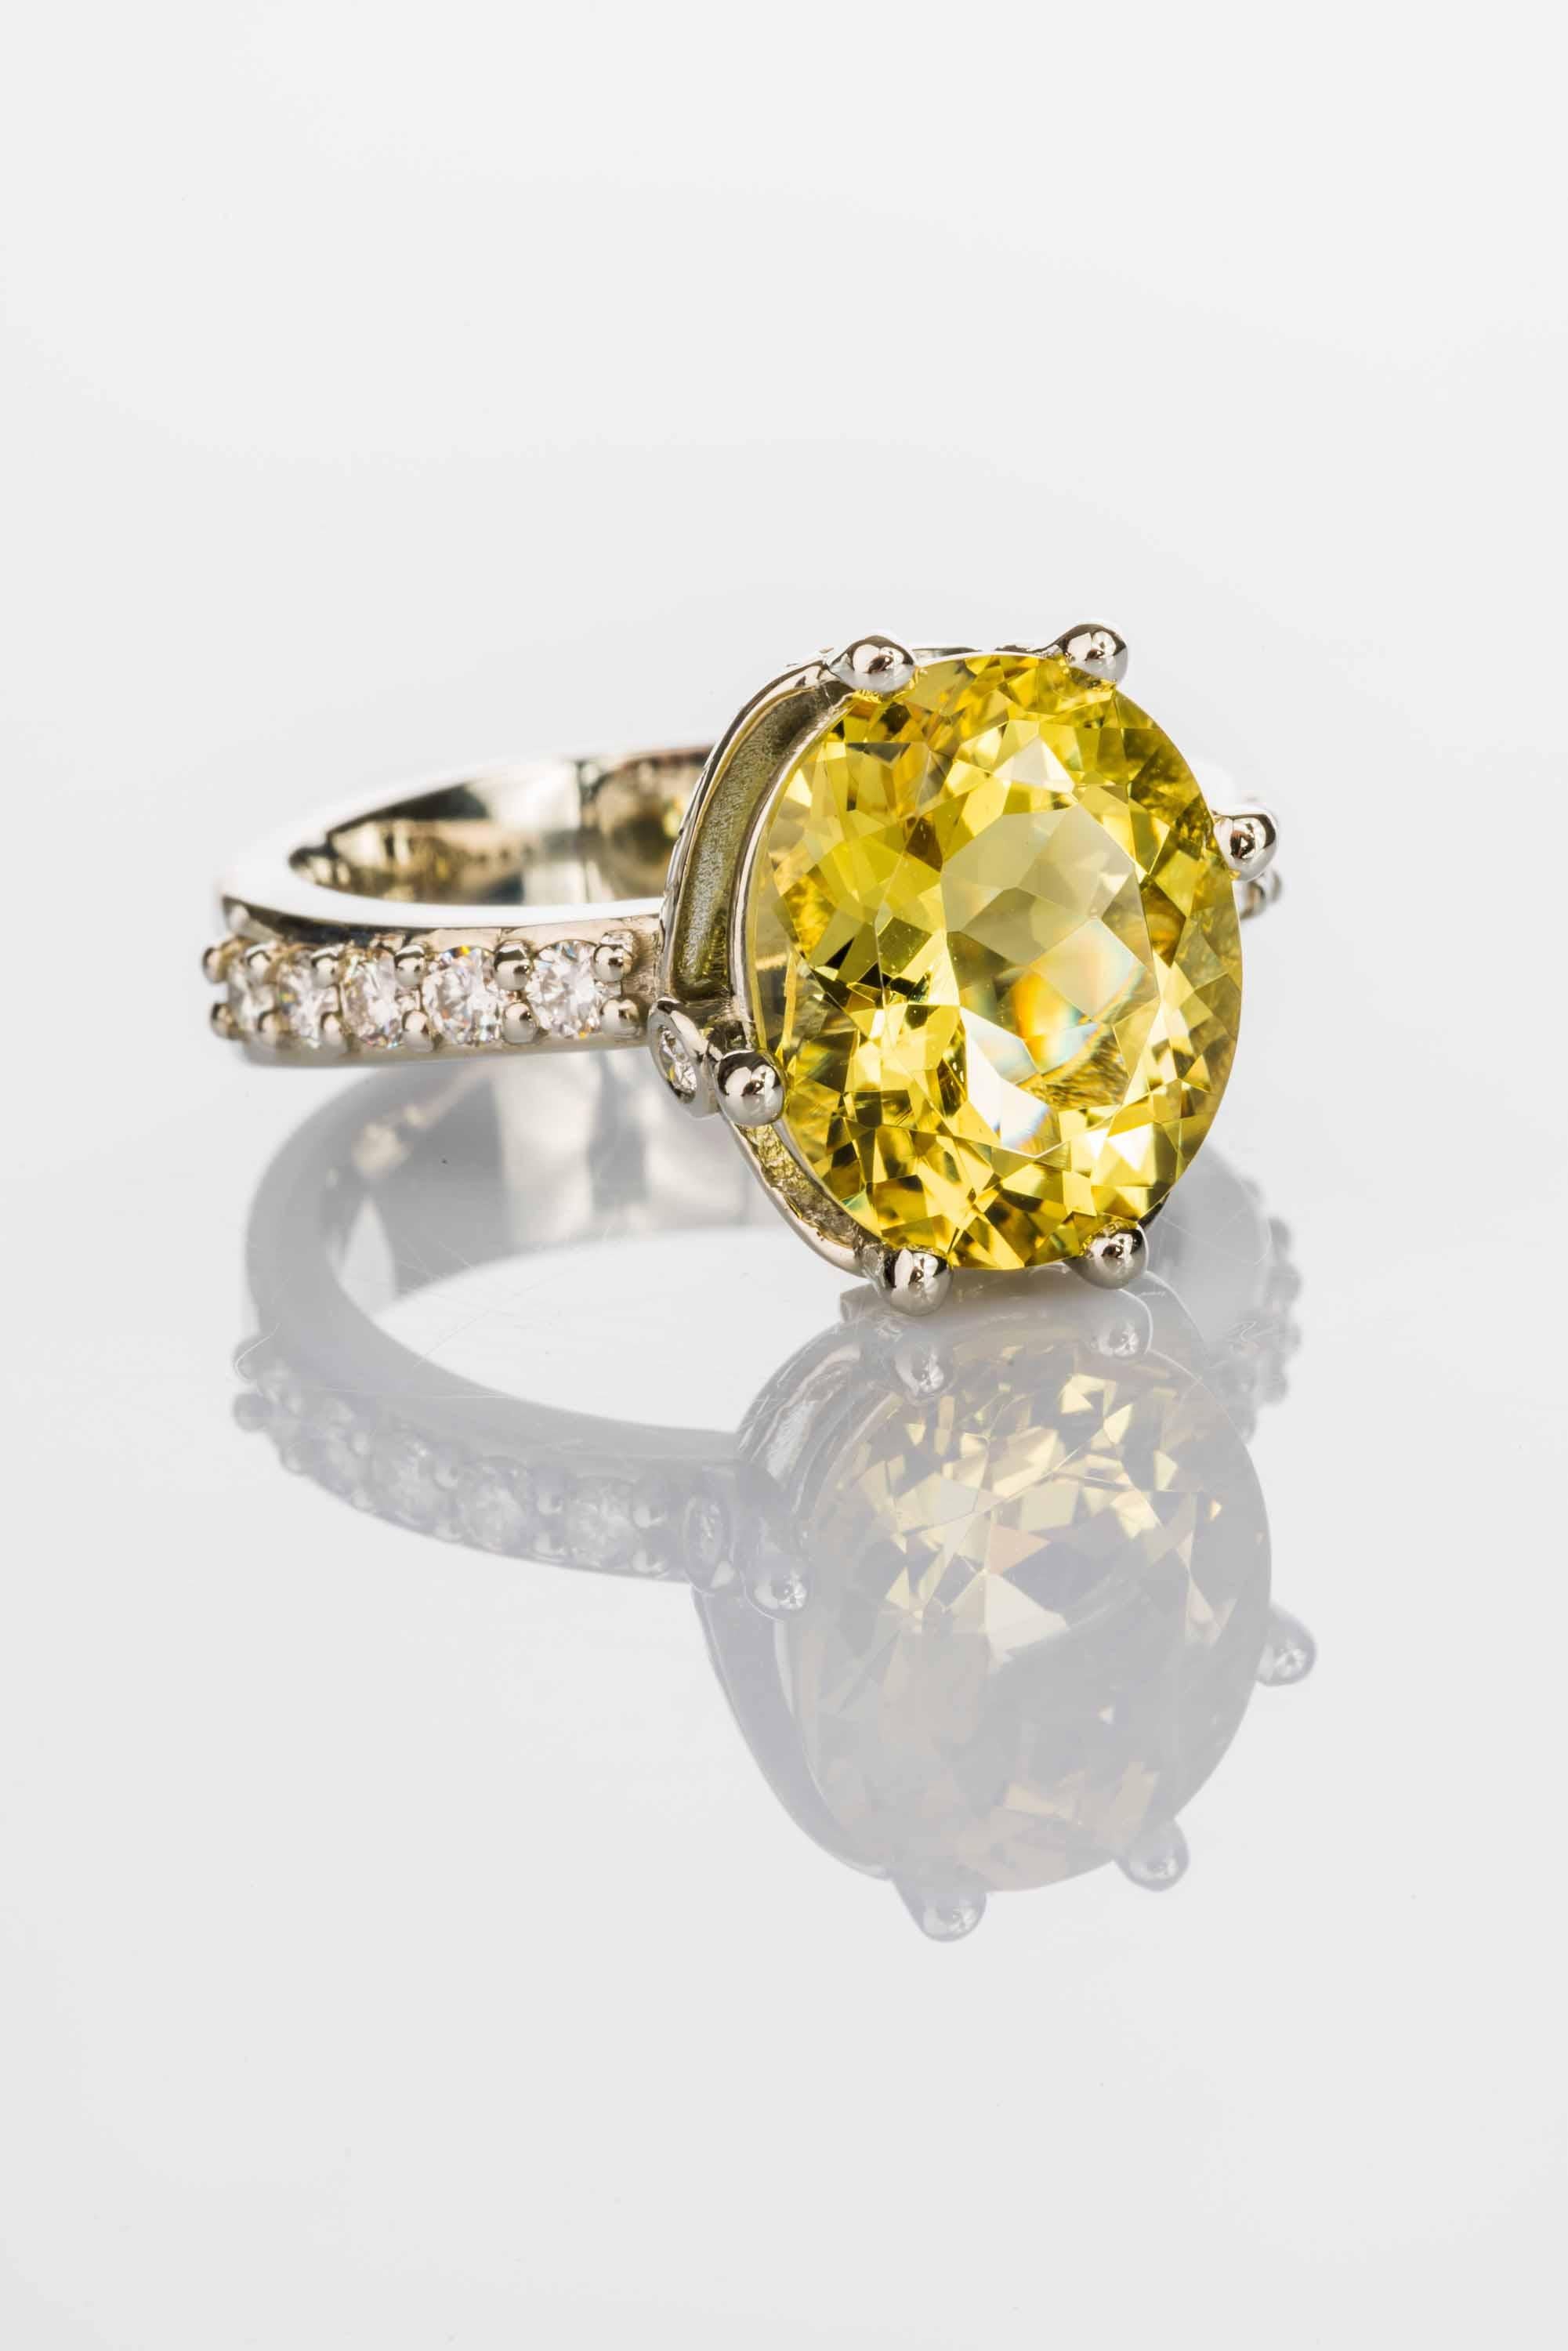 An 18k white gold ring prong set with an oval cut natural Nigerian yellow beryl, 4.70 total carat weight and fourteen round full cut white diamonds F color VS clarity 0.55 total carat weight, ring size 7. This ring was custom designed and made by